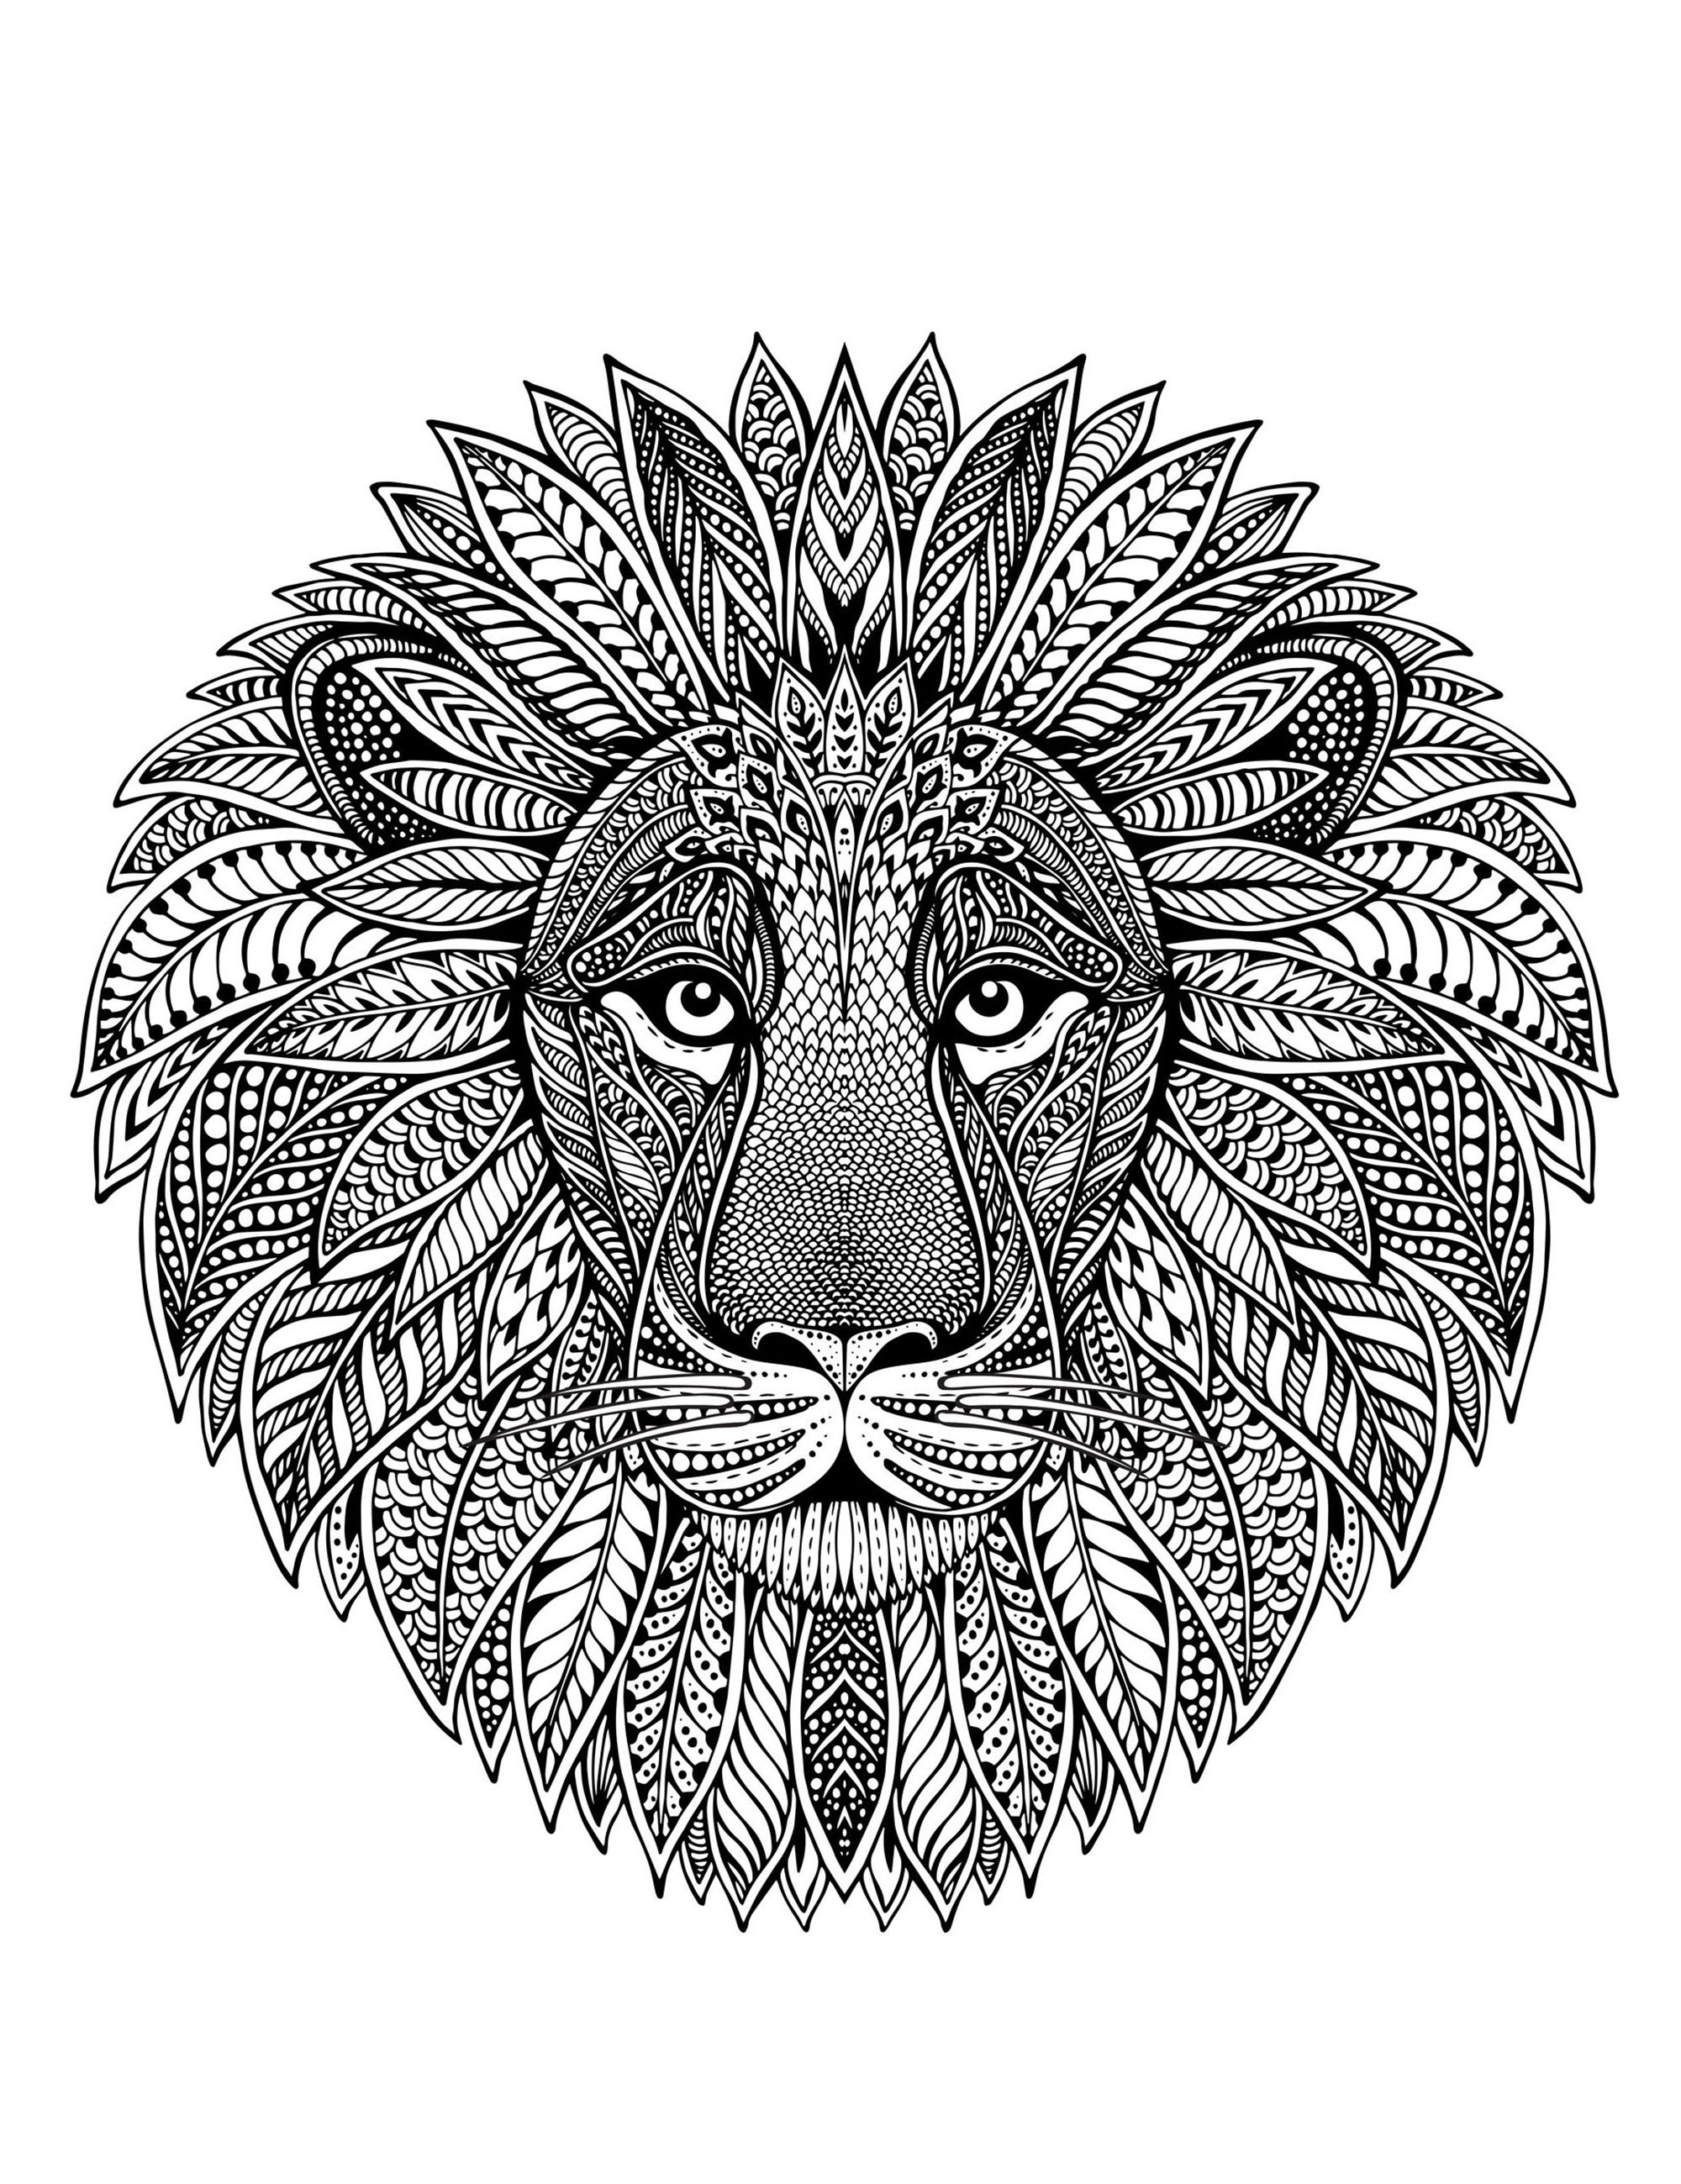 Lion head as Mandala. If you are ready to spend long minutes of relaxation, get ready to color this complex Mandala ... You can use many colors if you wish. You must clear your mind and allow yourself to forget all your worries and responsibilities.